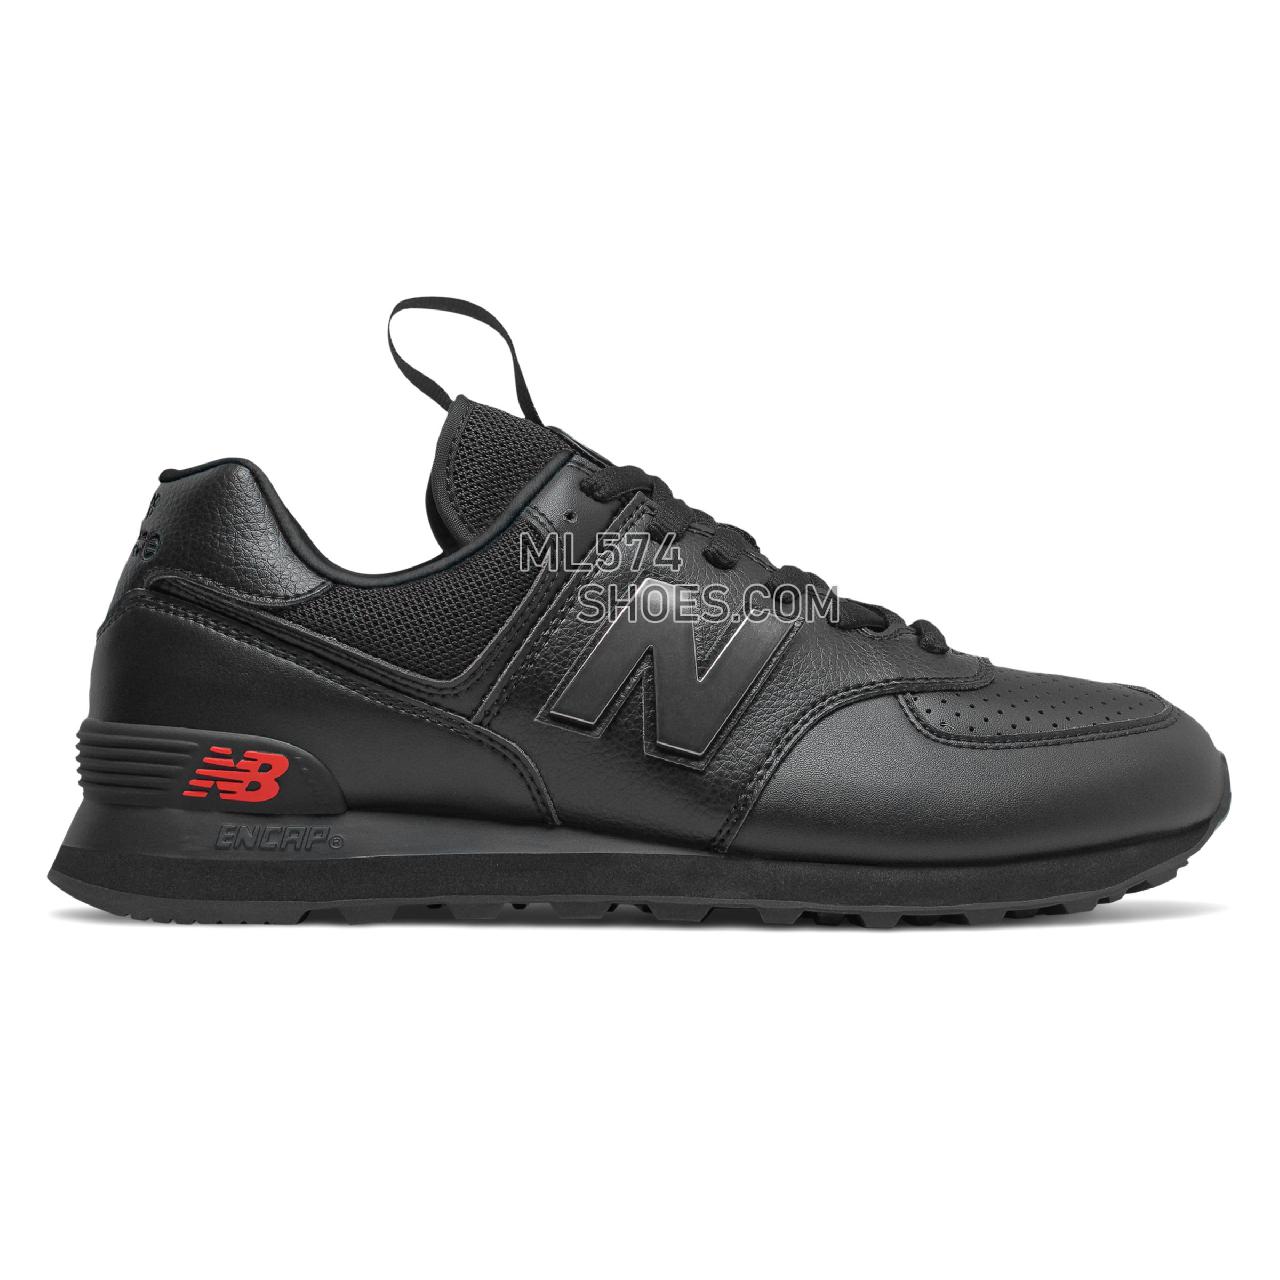 New Balance 574 - Men's Classic Sneakers - Black with Black Caviar - ML574SOW